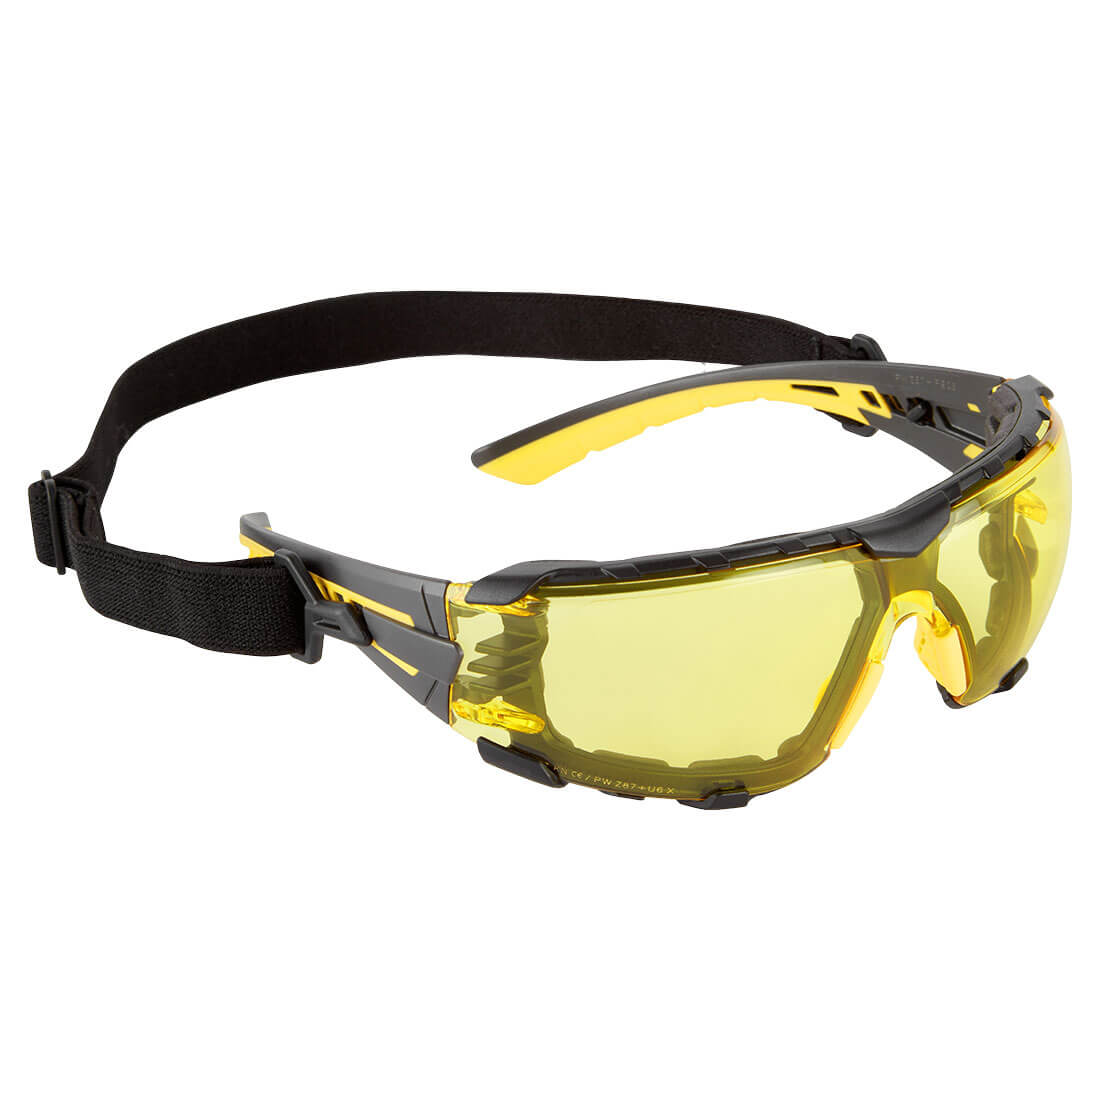 PS28 - Tech Look Pro KN Safety Glasses